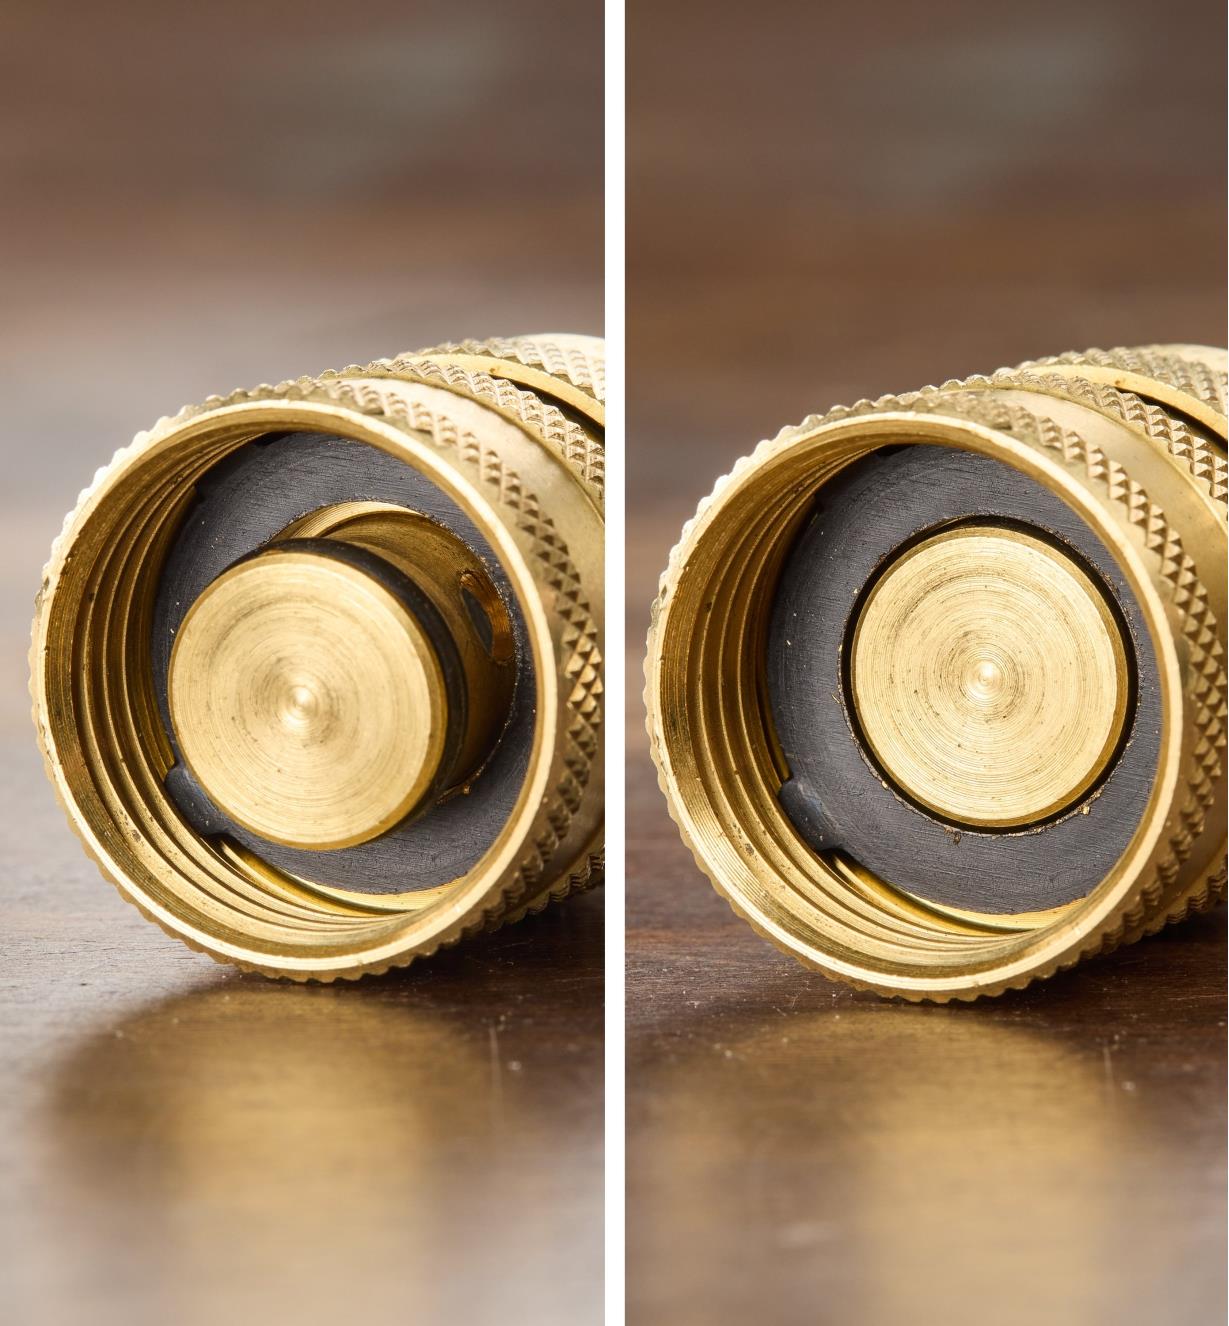 Two images of the female water-stop coupler showing the internal valve that stops water flow both open and closed